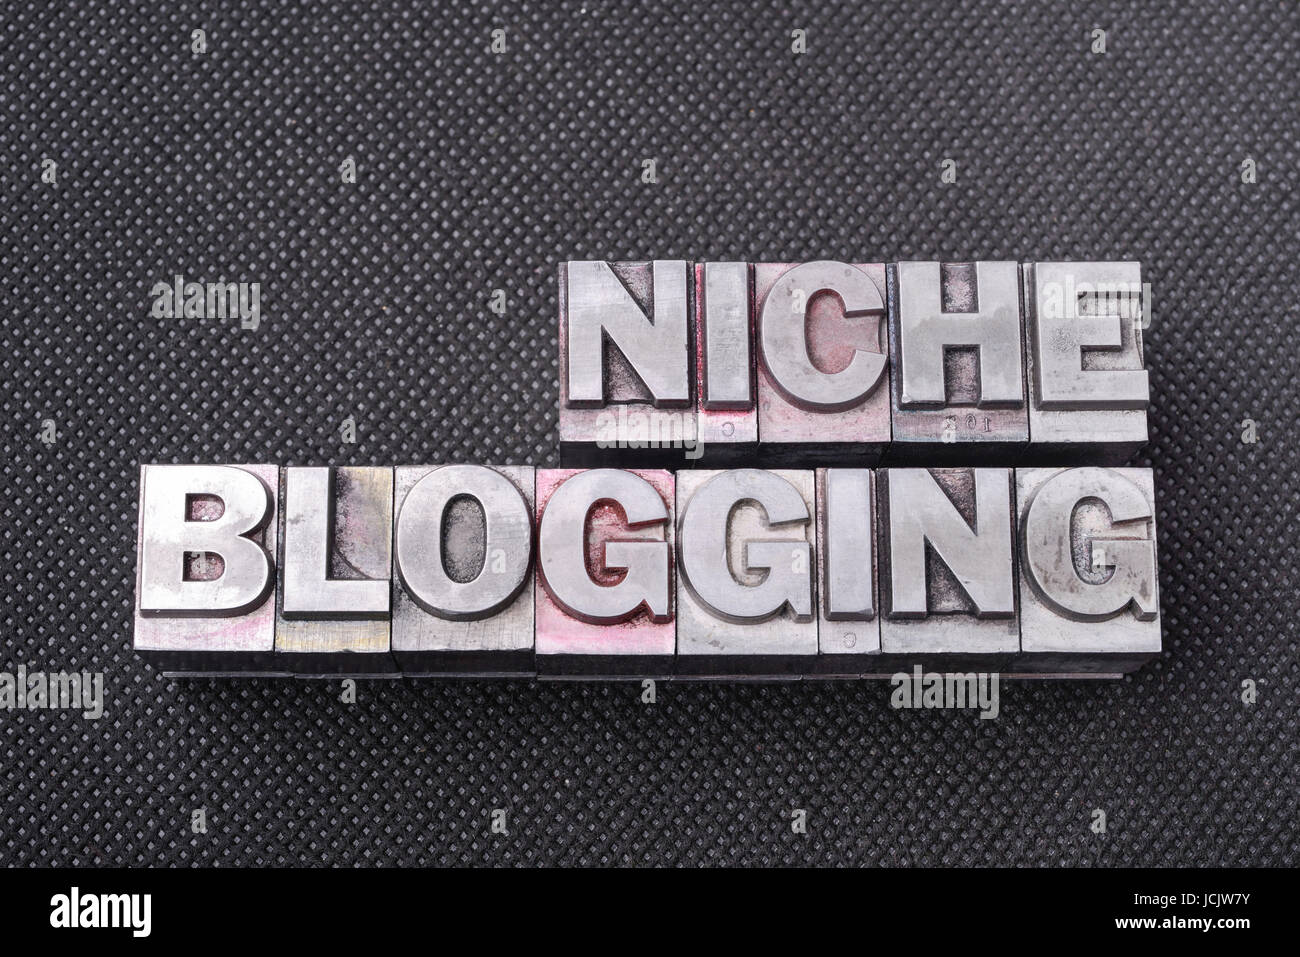 niche blogging phrase made from metallic letterpress blocks on black perforated surface Stock Photo